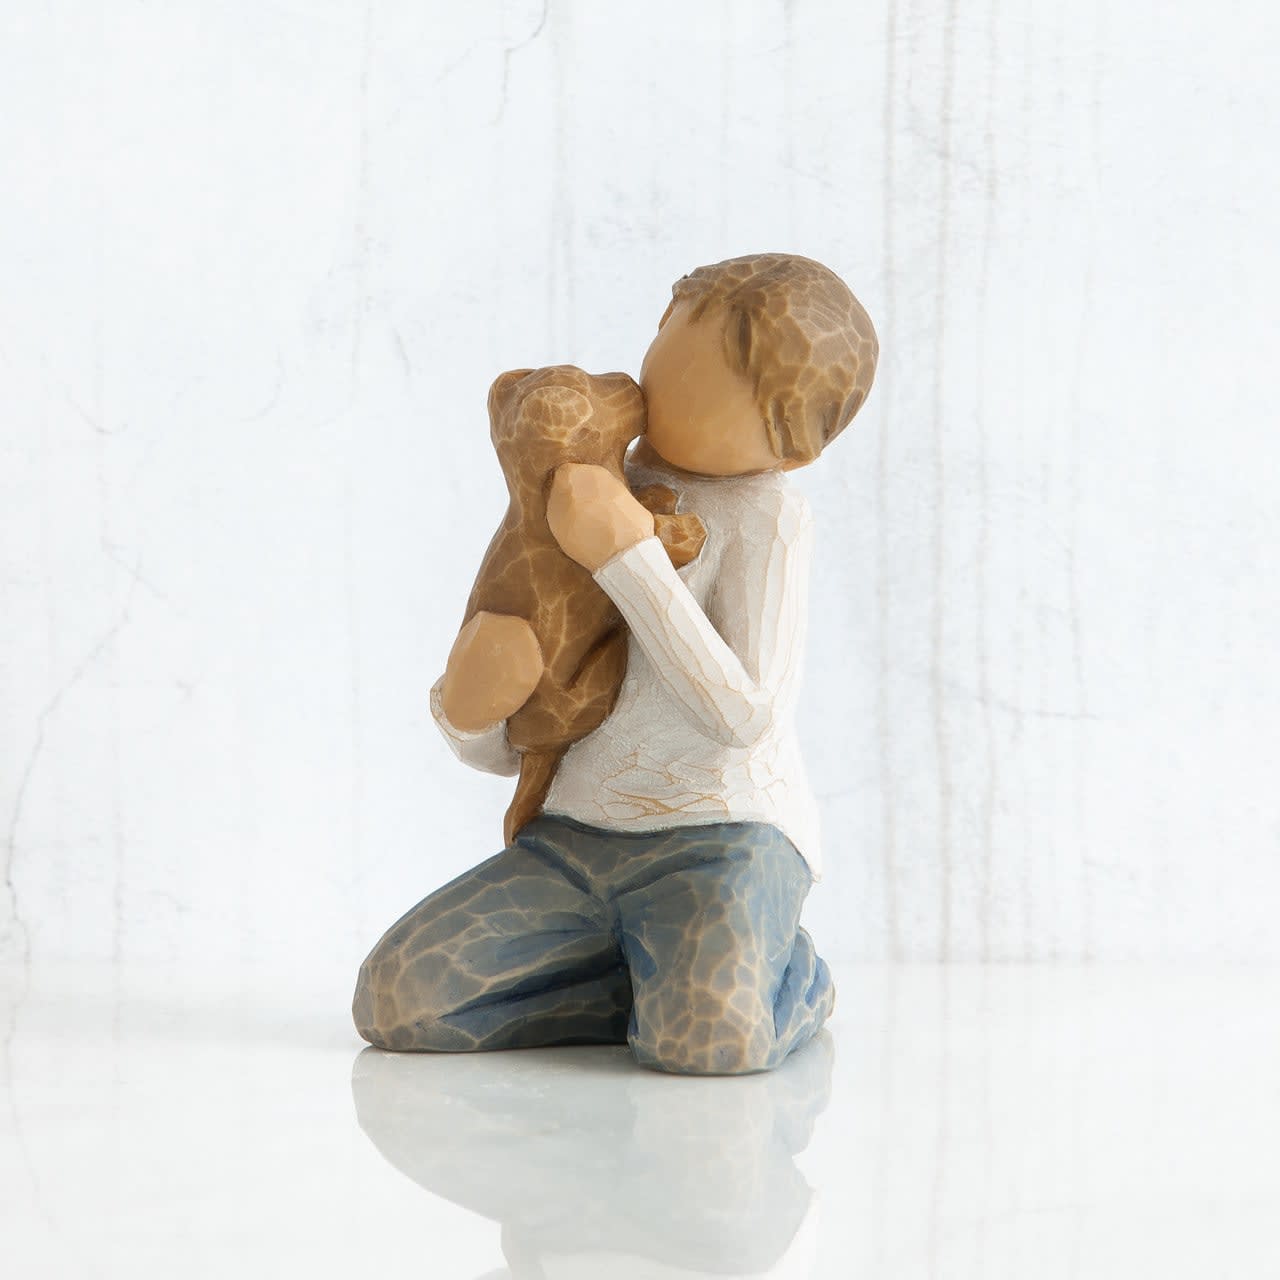 WILLOW TREE KINDNESS BOY - Child figures work well in Family Groupings. Position two (or three or more) figures so that they appear to be interacting, turned toward one another, touching. Like families do.